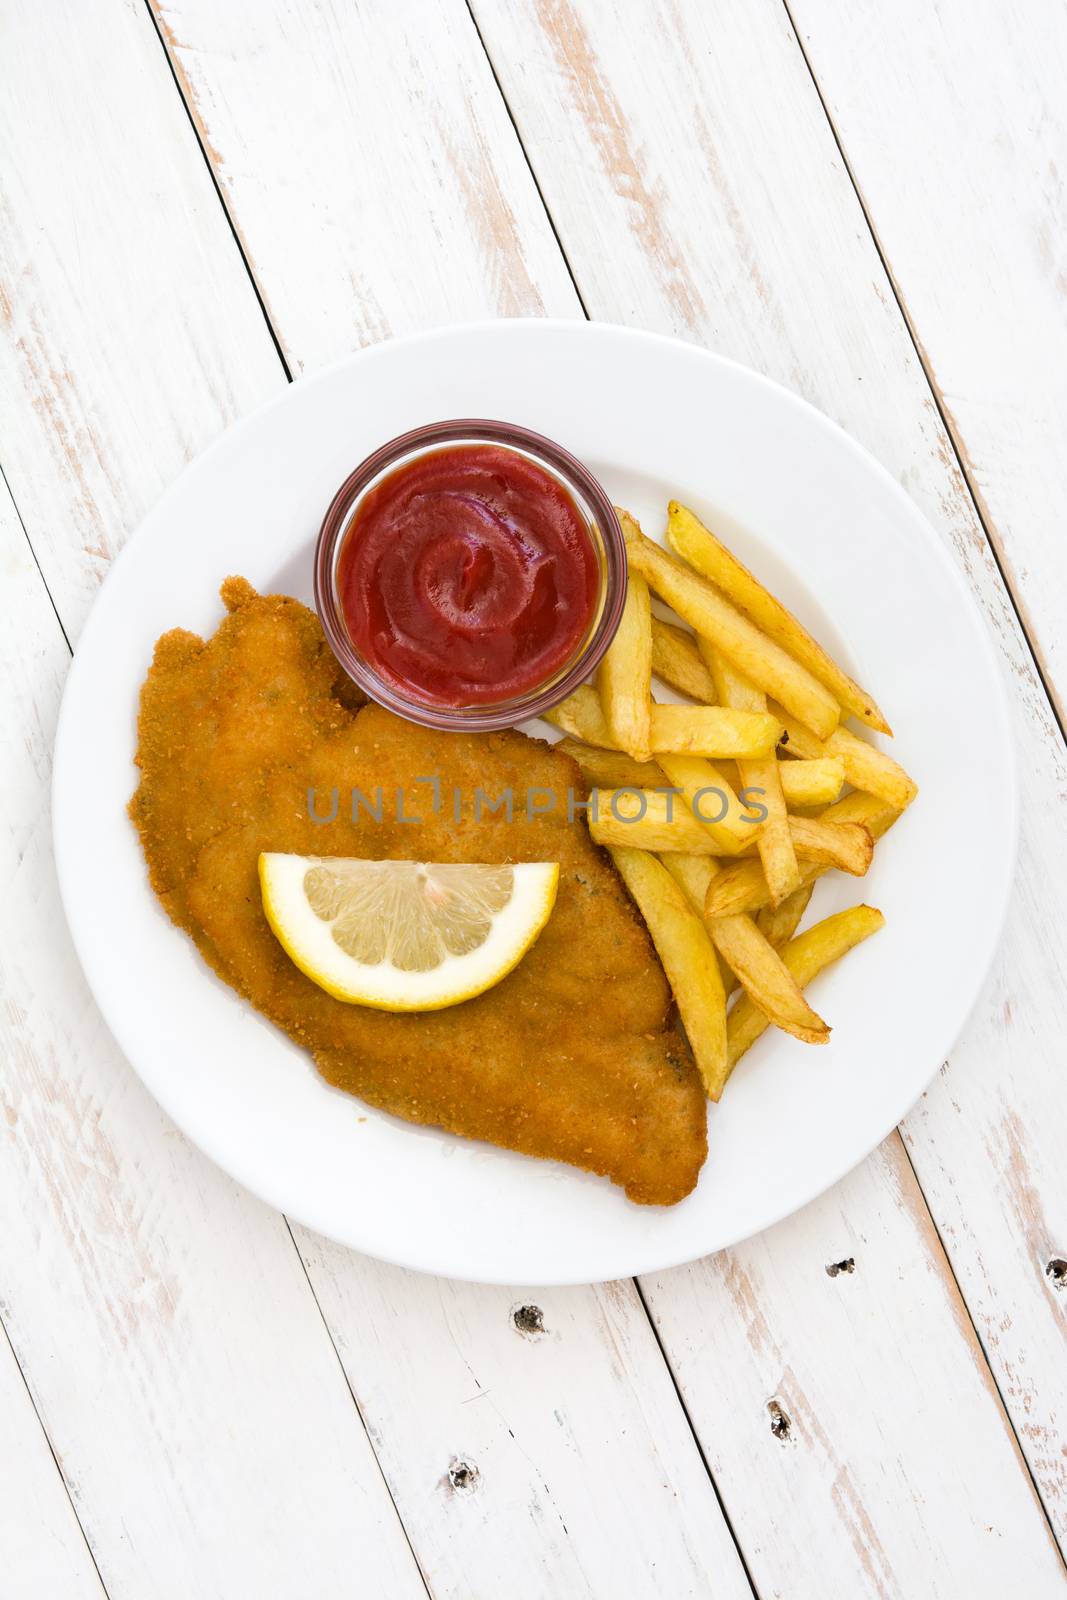 Wiener schnitzel with fried potatoes on white wooden background